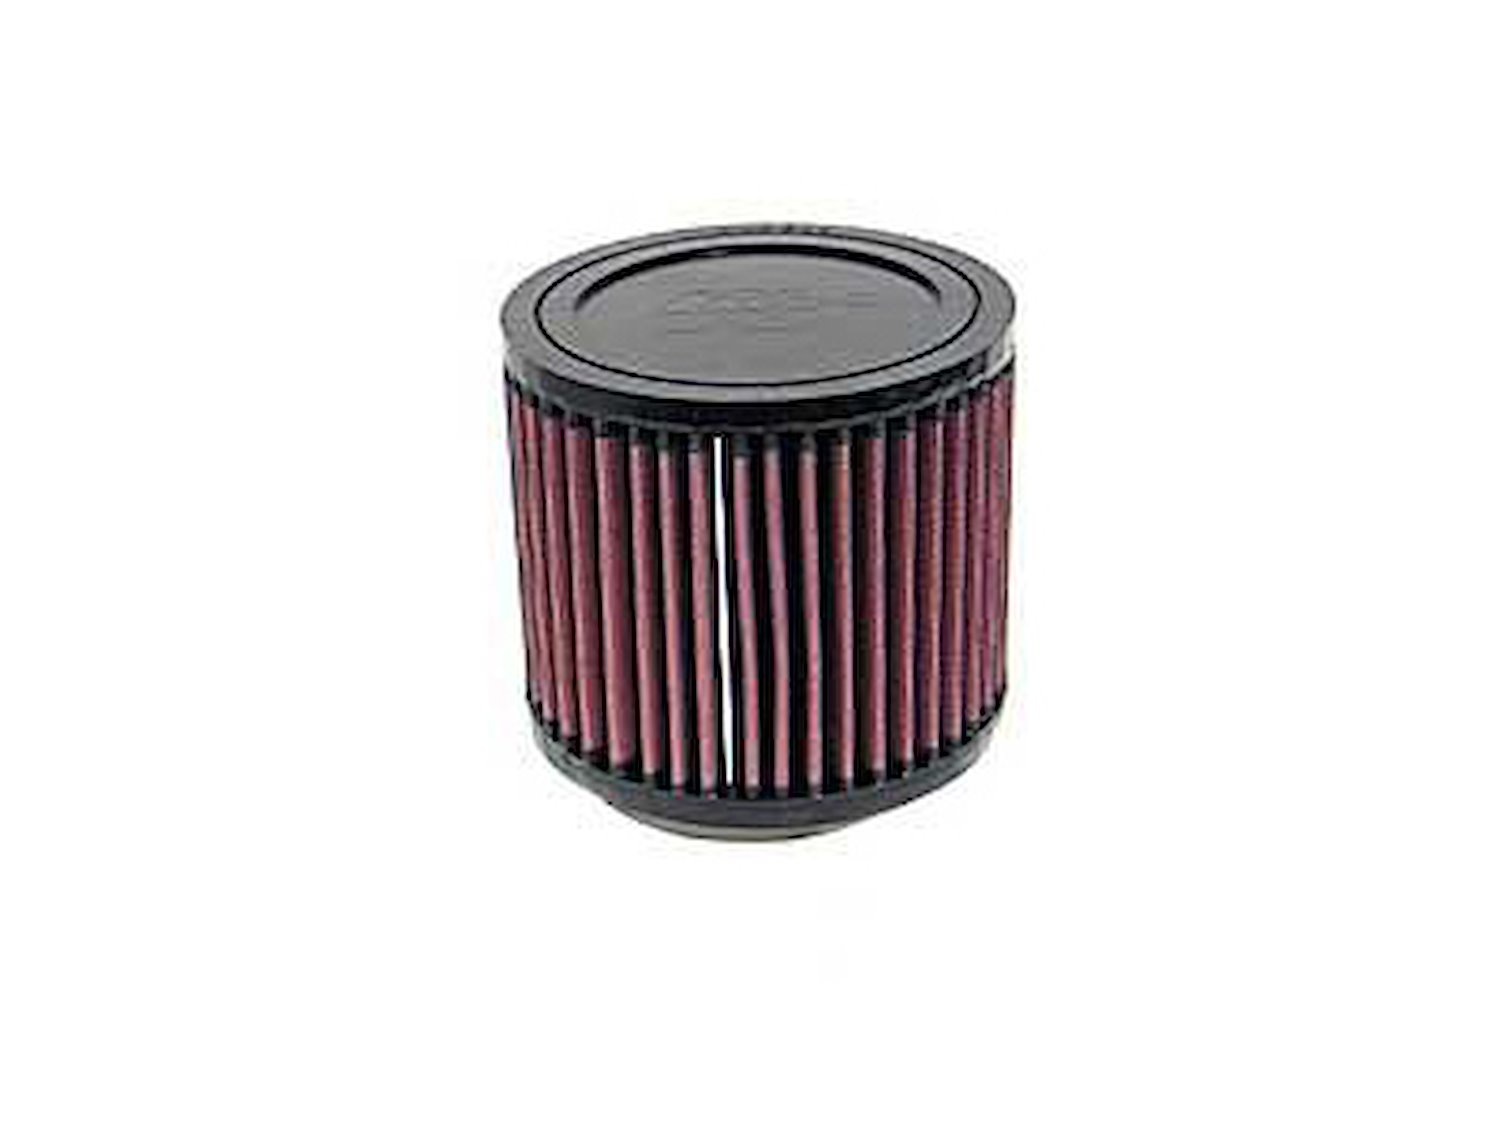 Round Straight Air Filter Flange Dia. (F): 2.625" (67 mm)